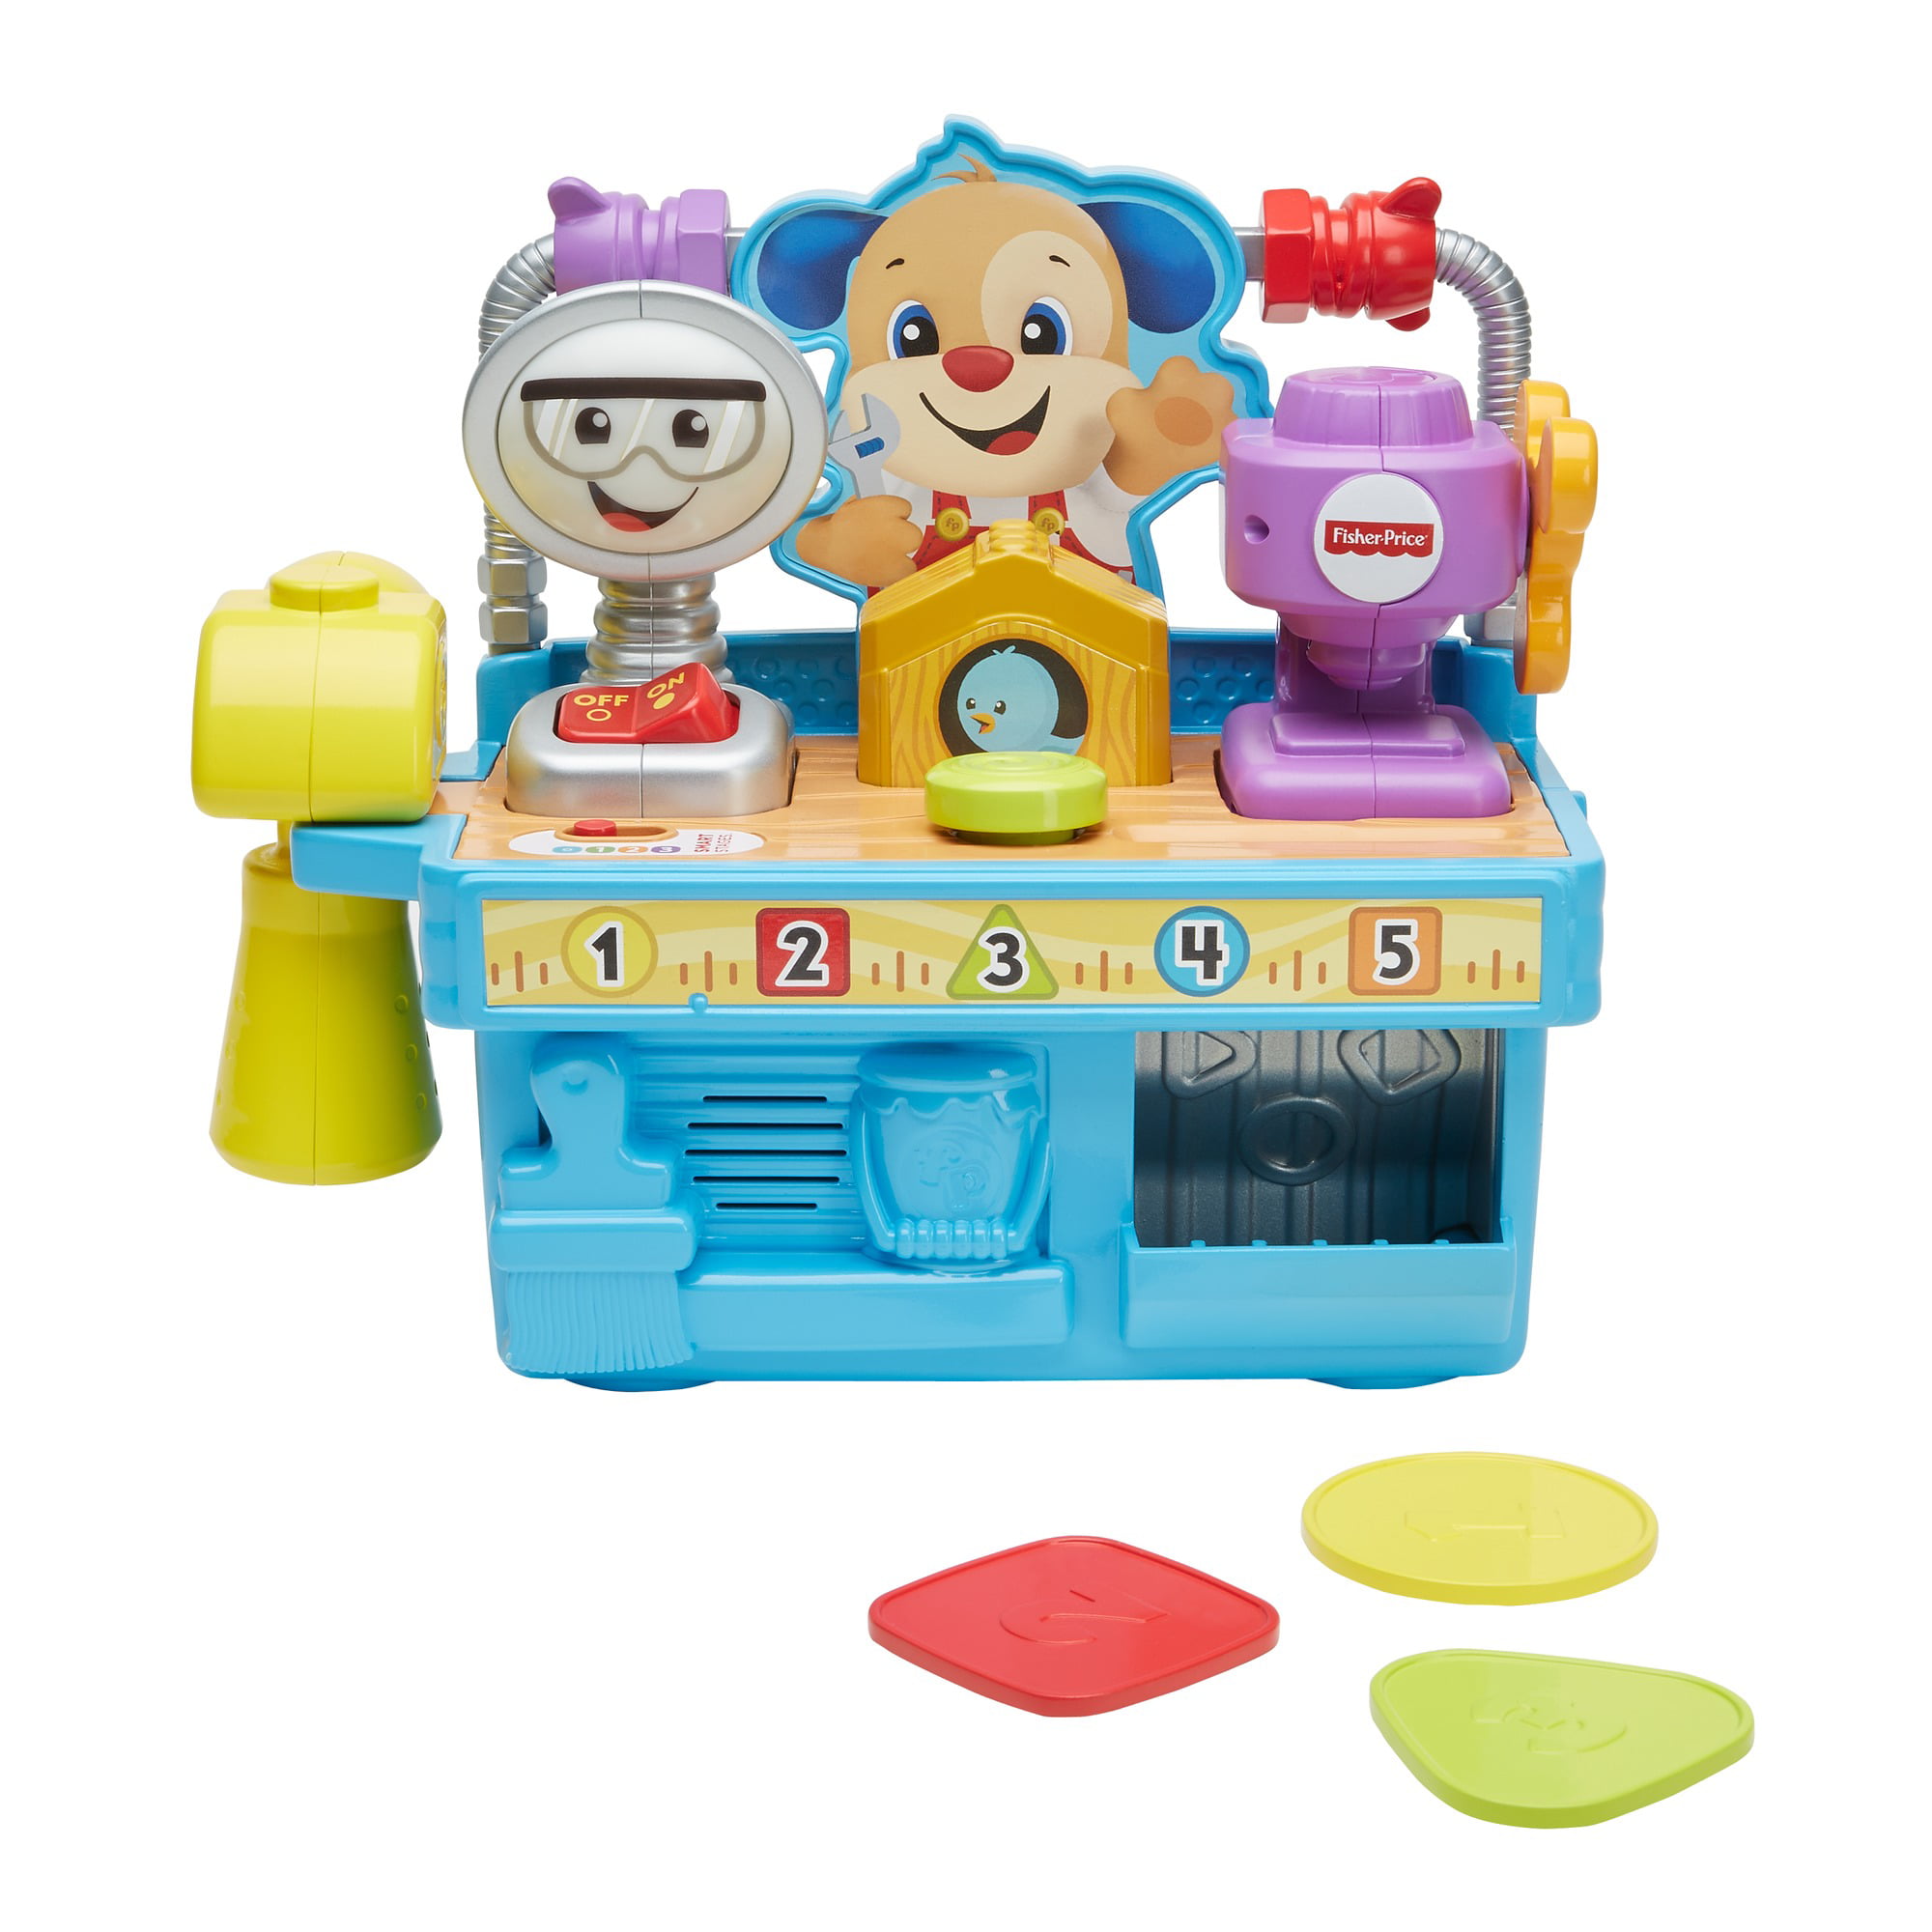 FisherPrice Busy Learning Tool Bench with Accessories